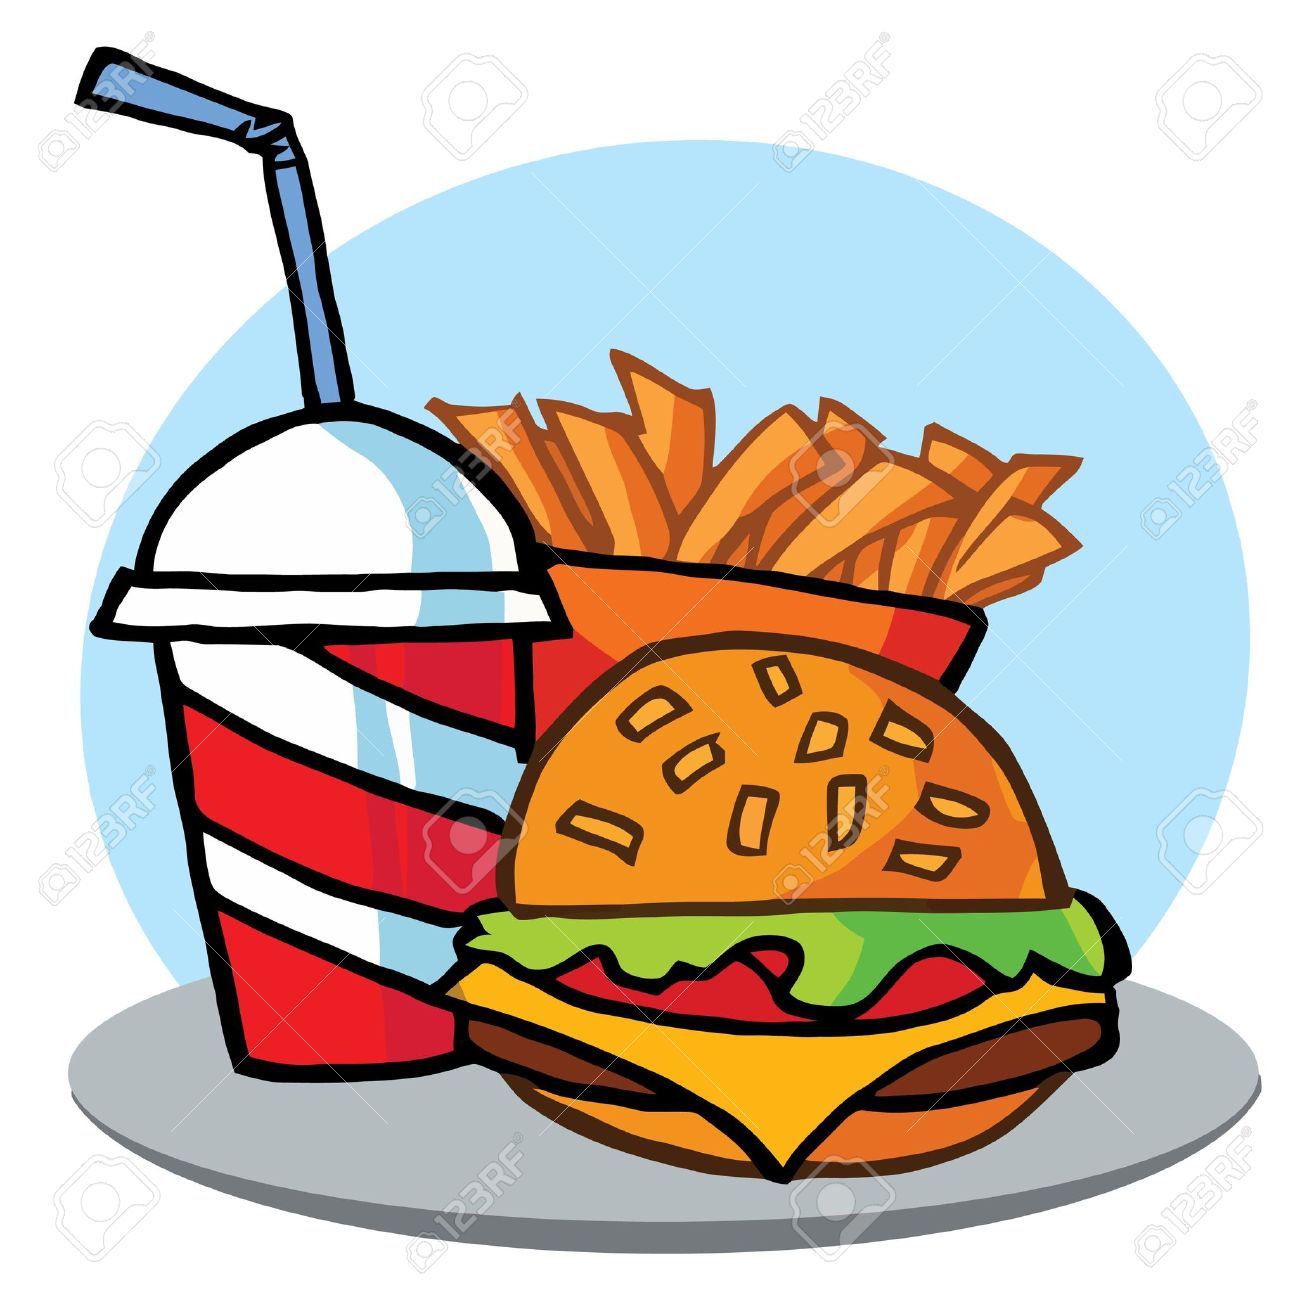 Unhealthy Food Clipart For Kids.